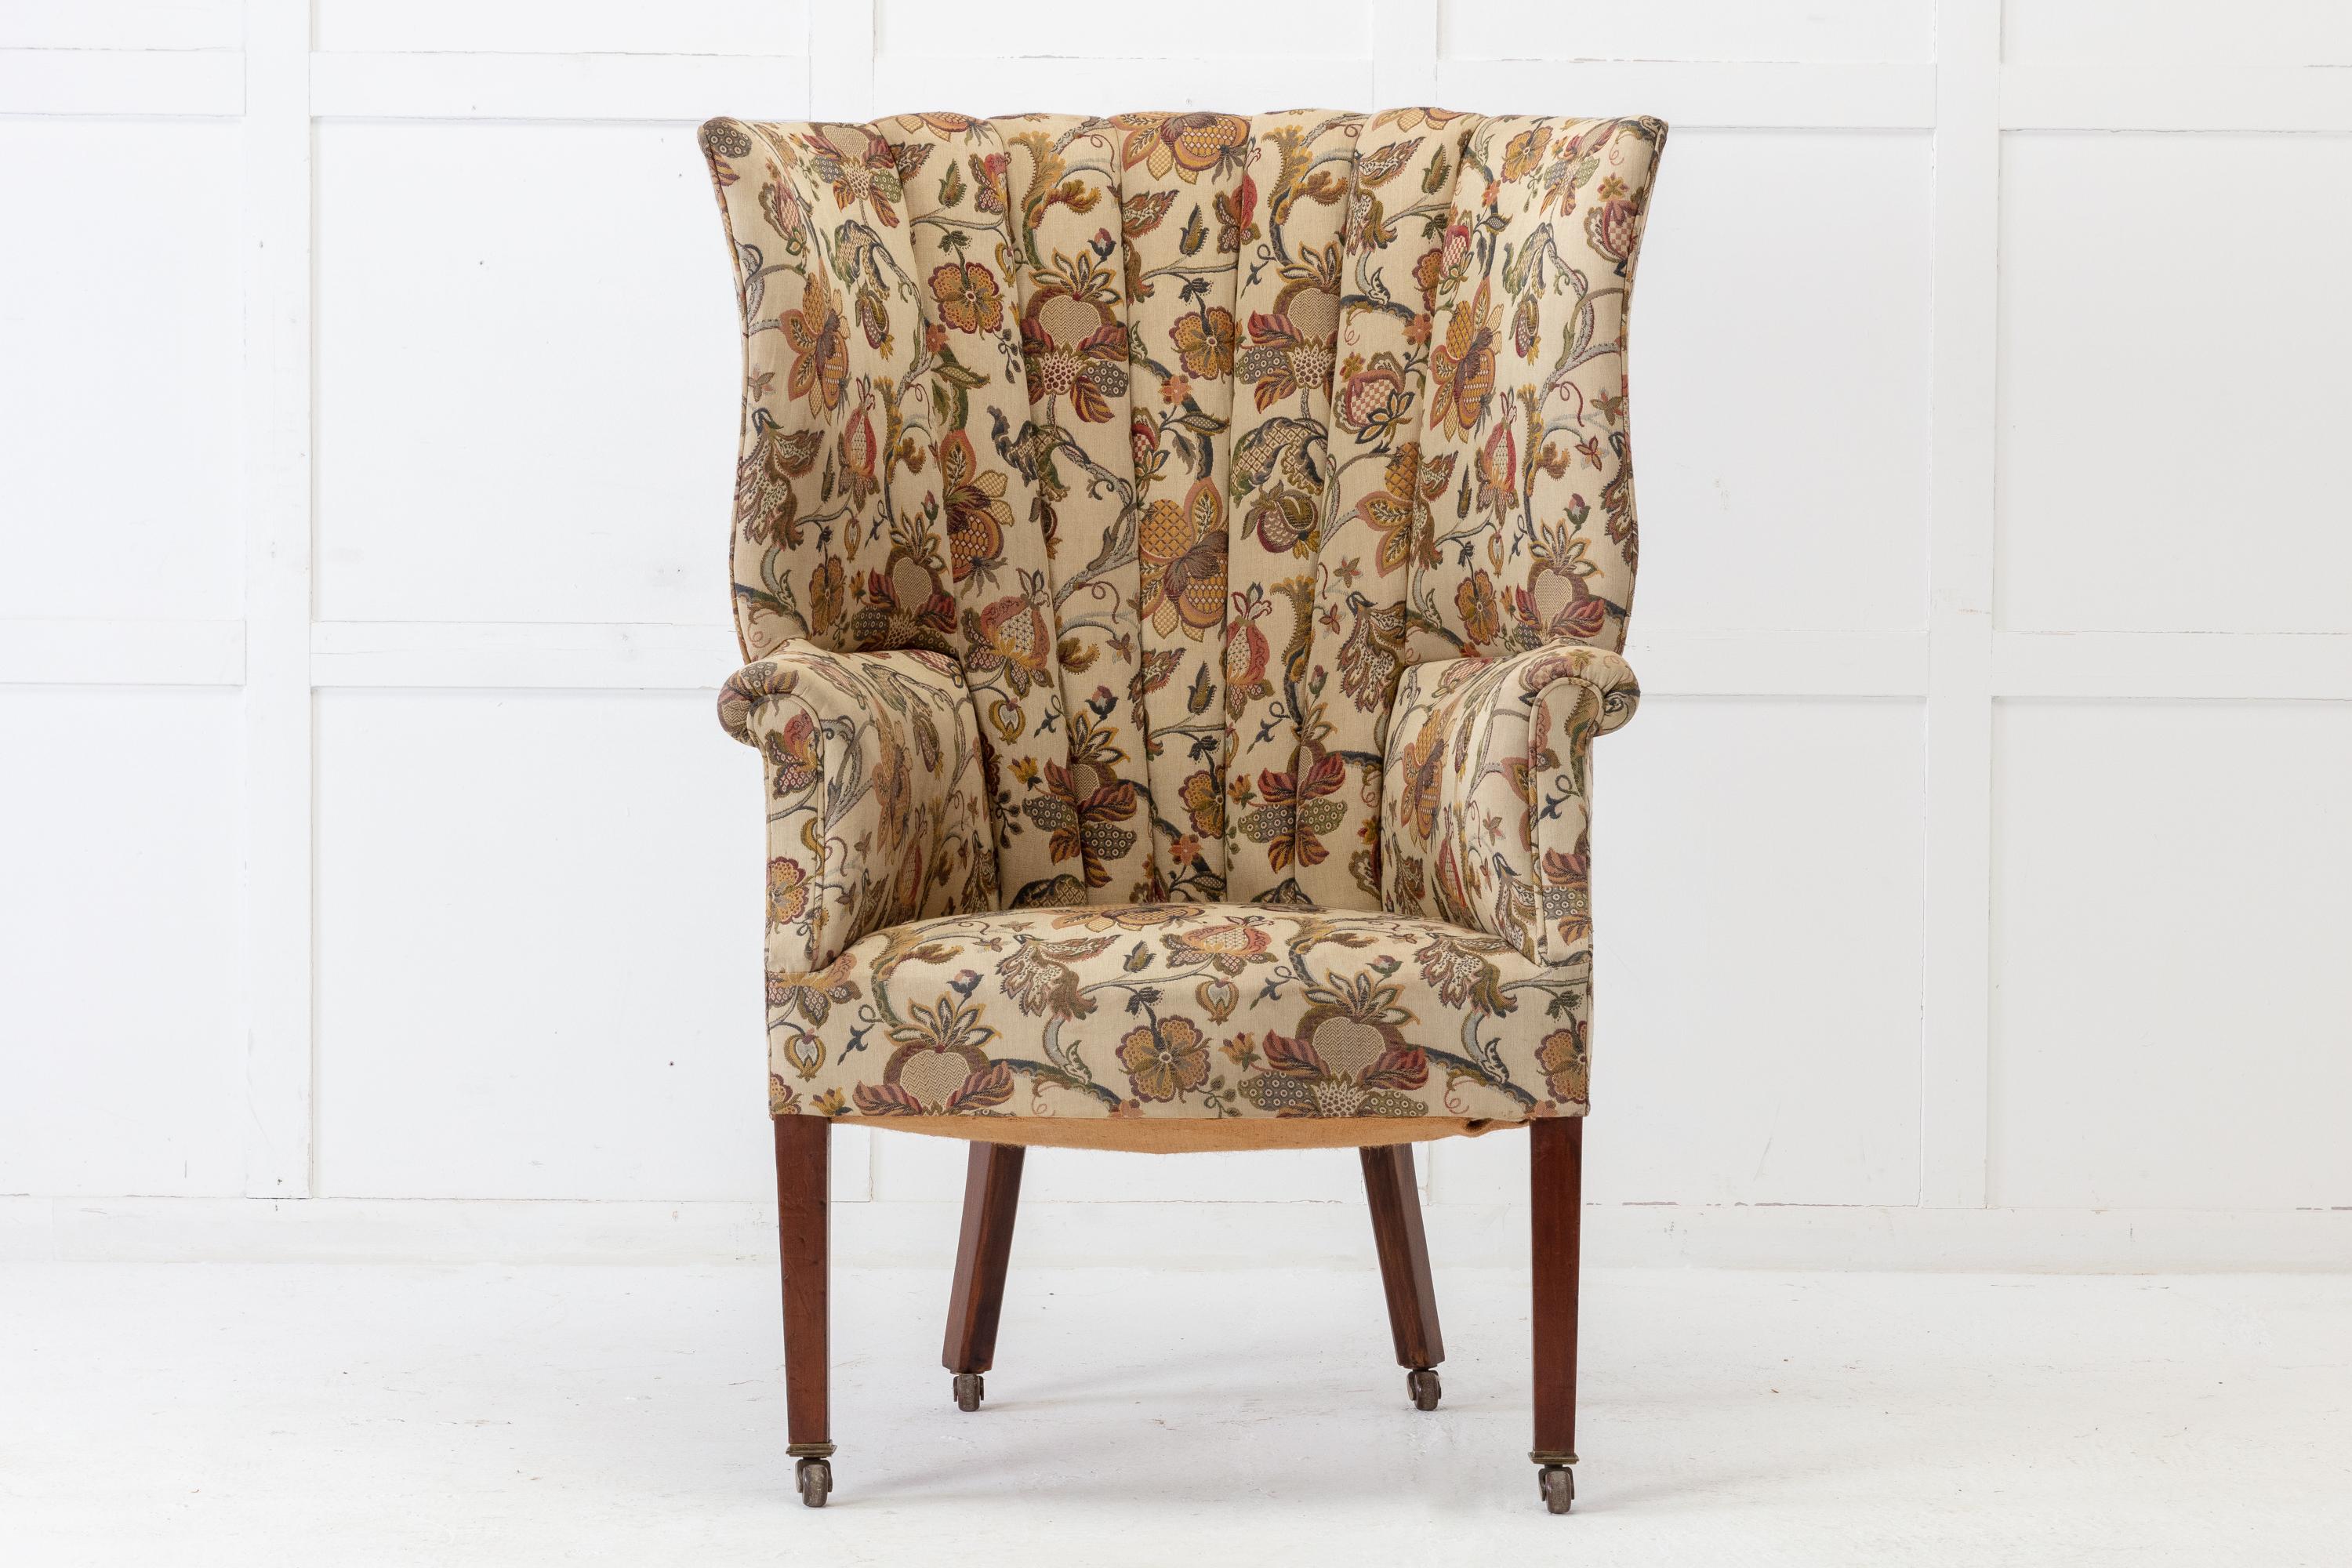 Late 19th century English barrel back armchair, having a high back and wings over enclosed arms. Raised on slender straight legs and terminating in brass castors.

Good strong frame left in old fabric ready for reupholstery or to keep as it is.
  